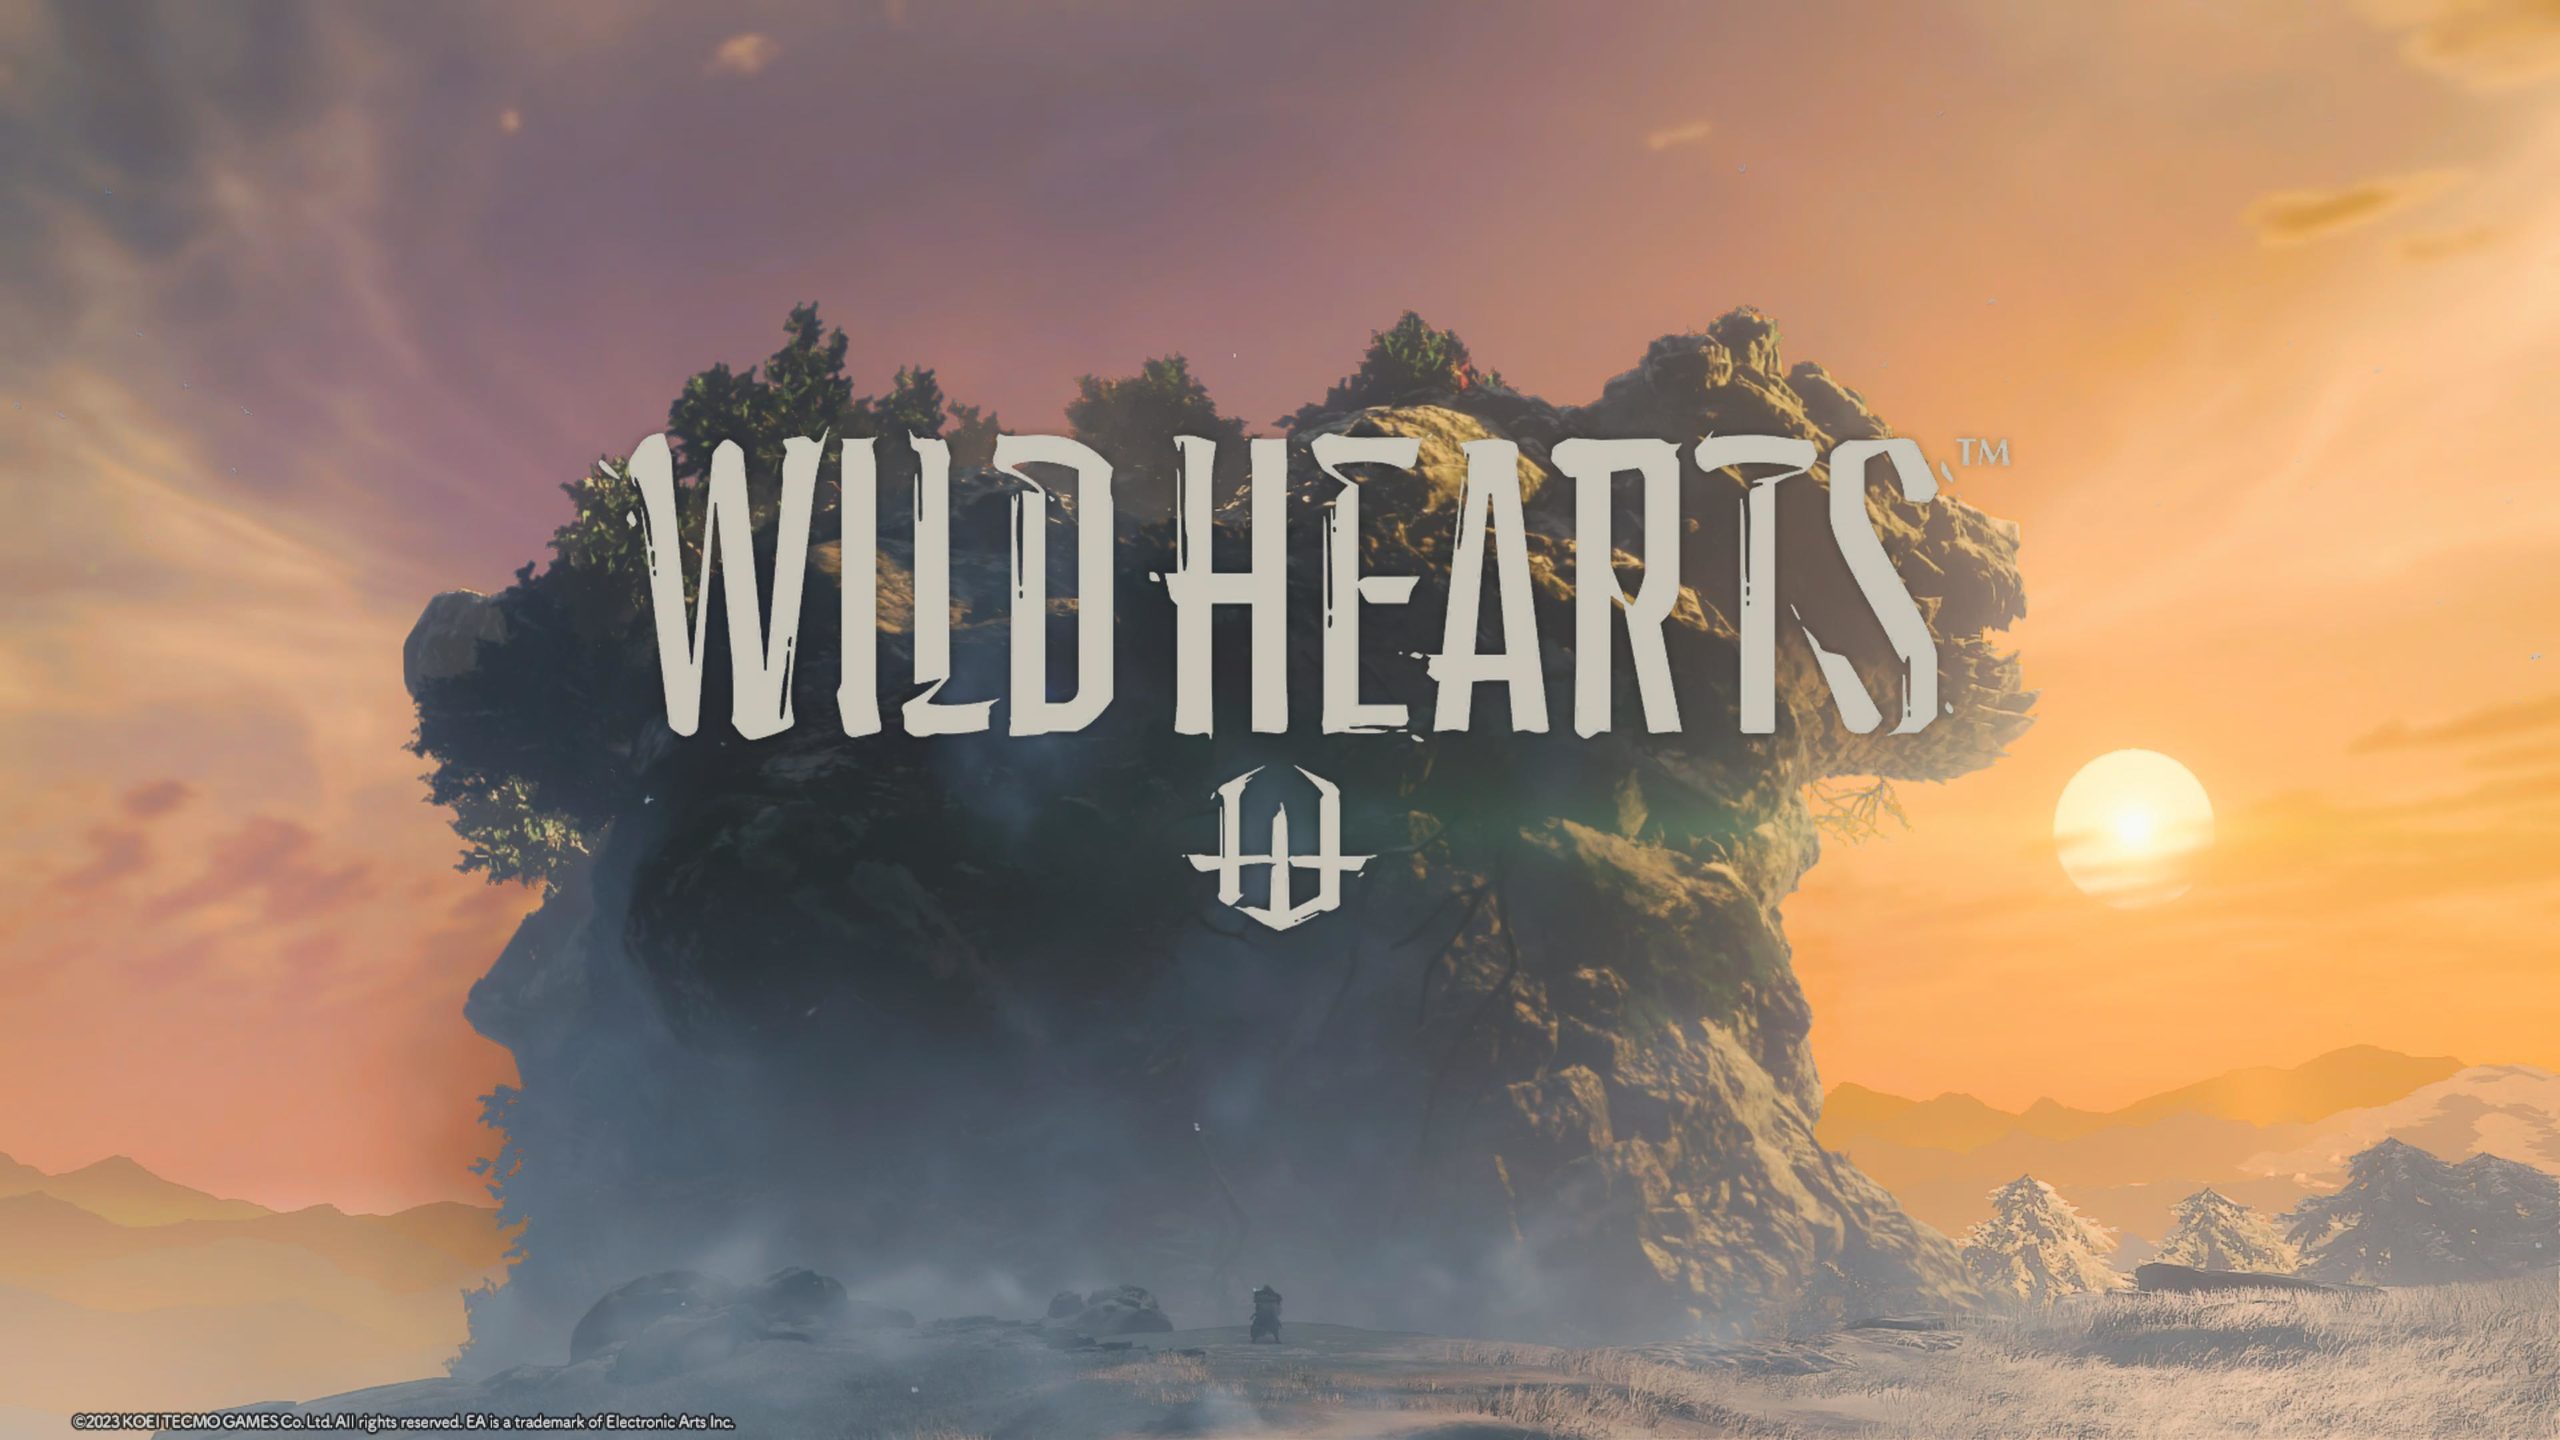 Wild Hearts Review